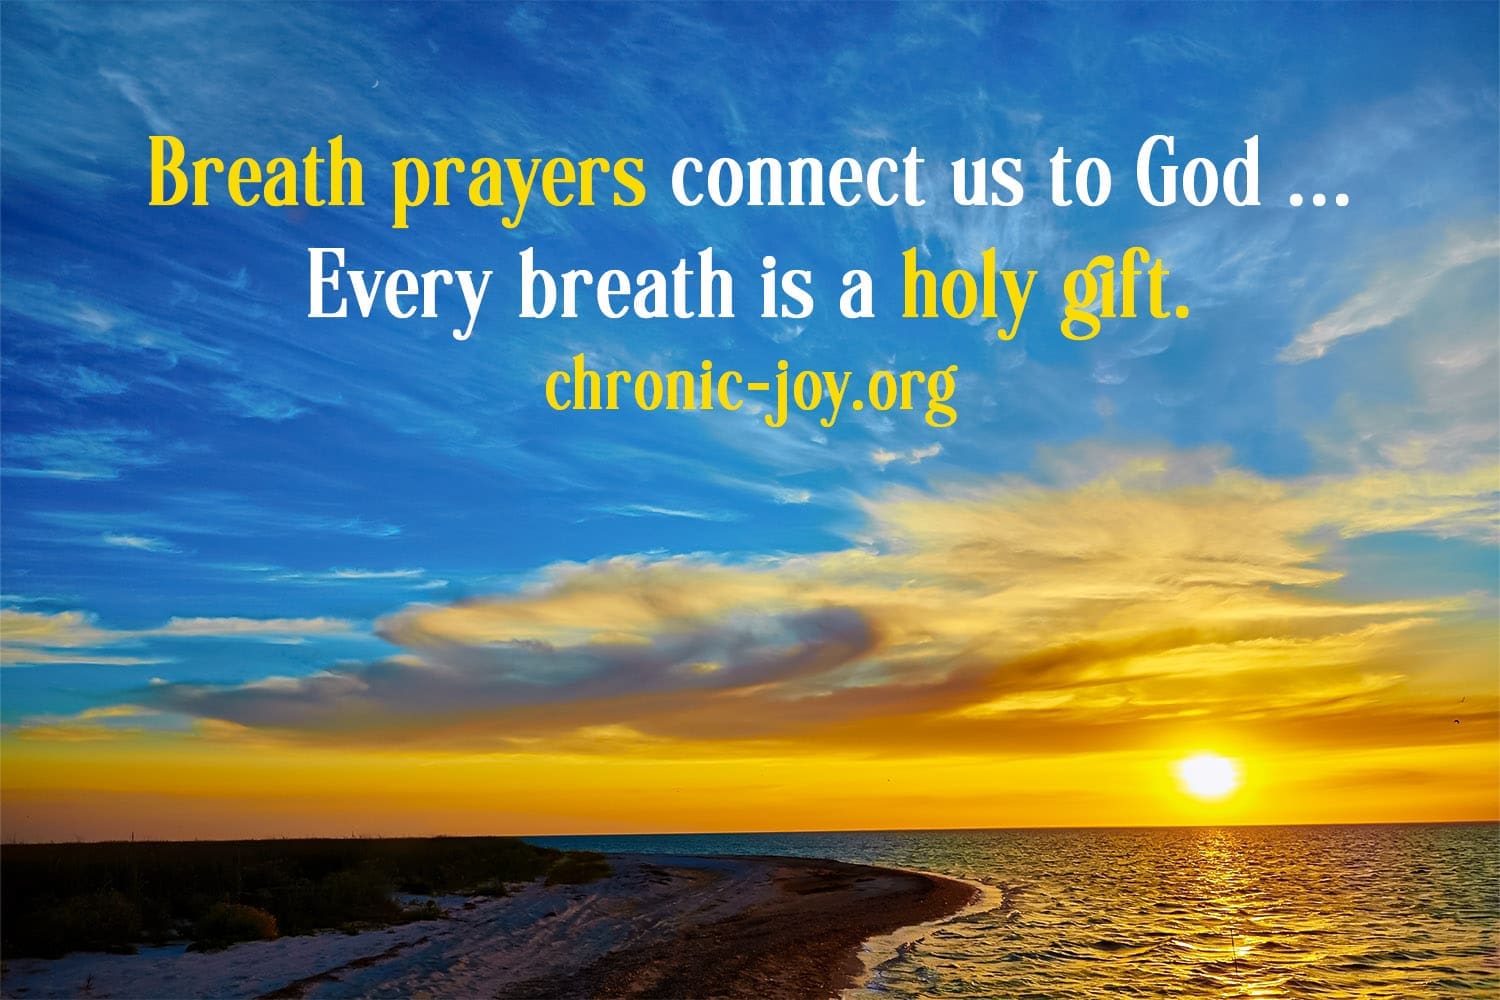 Breath prayers connect us to God ... Every breath is a holy gift.